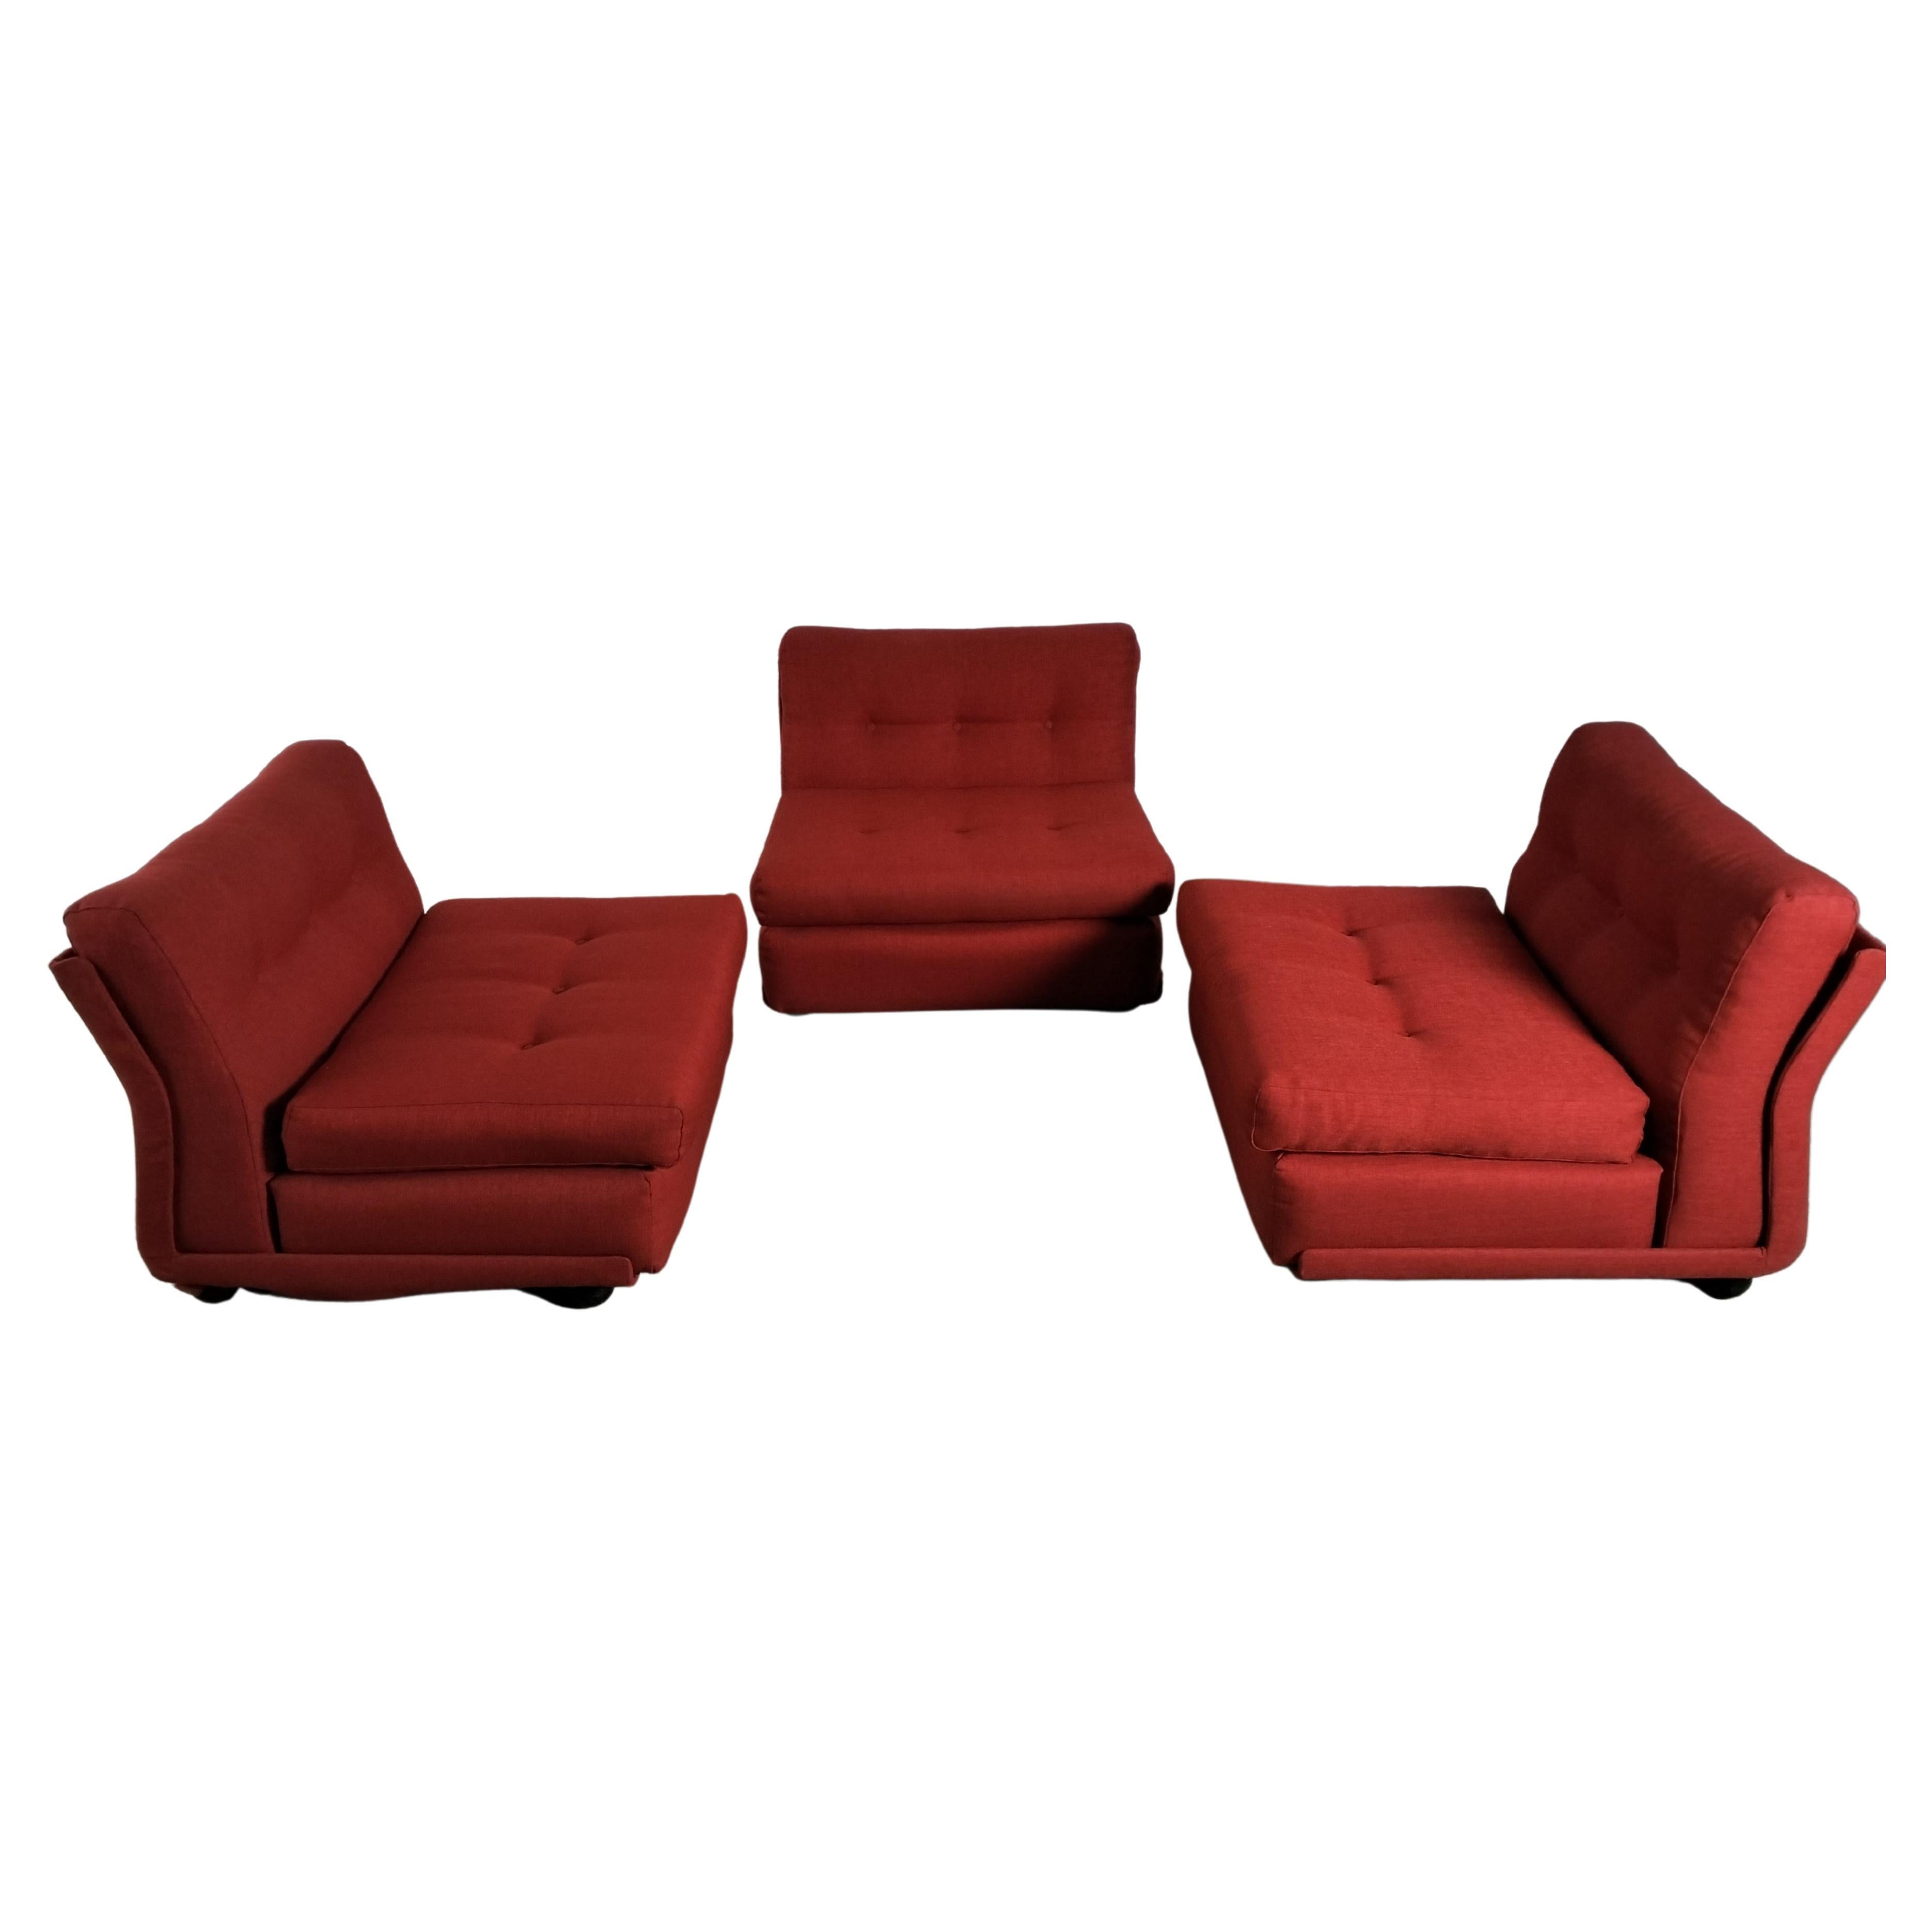 Set of 3 Red Amanta Lounge Chairs/Sofa by Mario Bellini for C&B Italia, 1970s For Sale